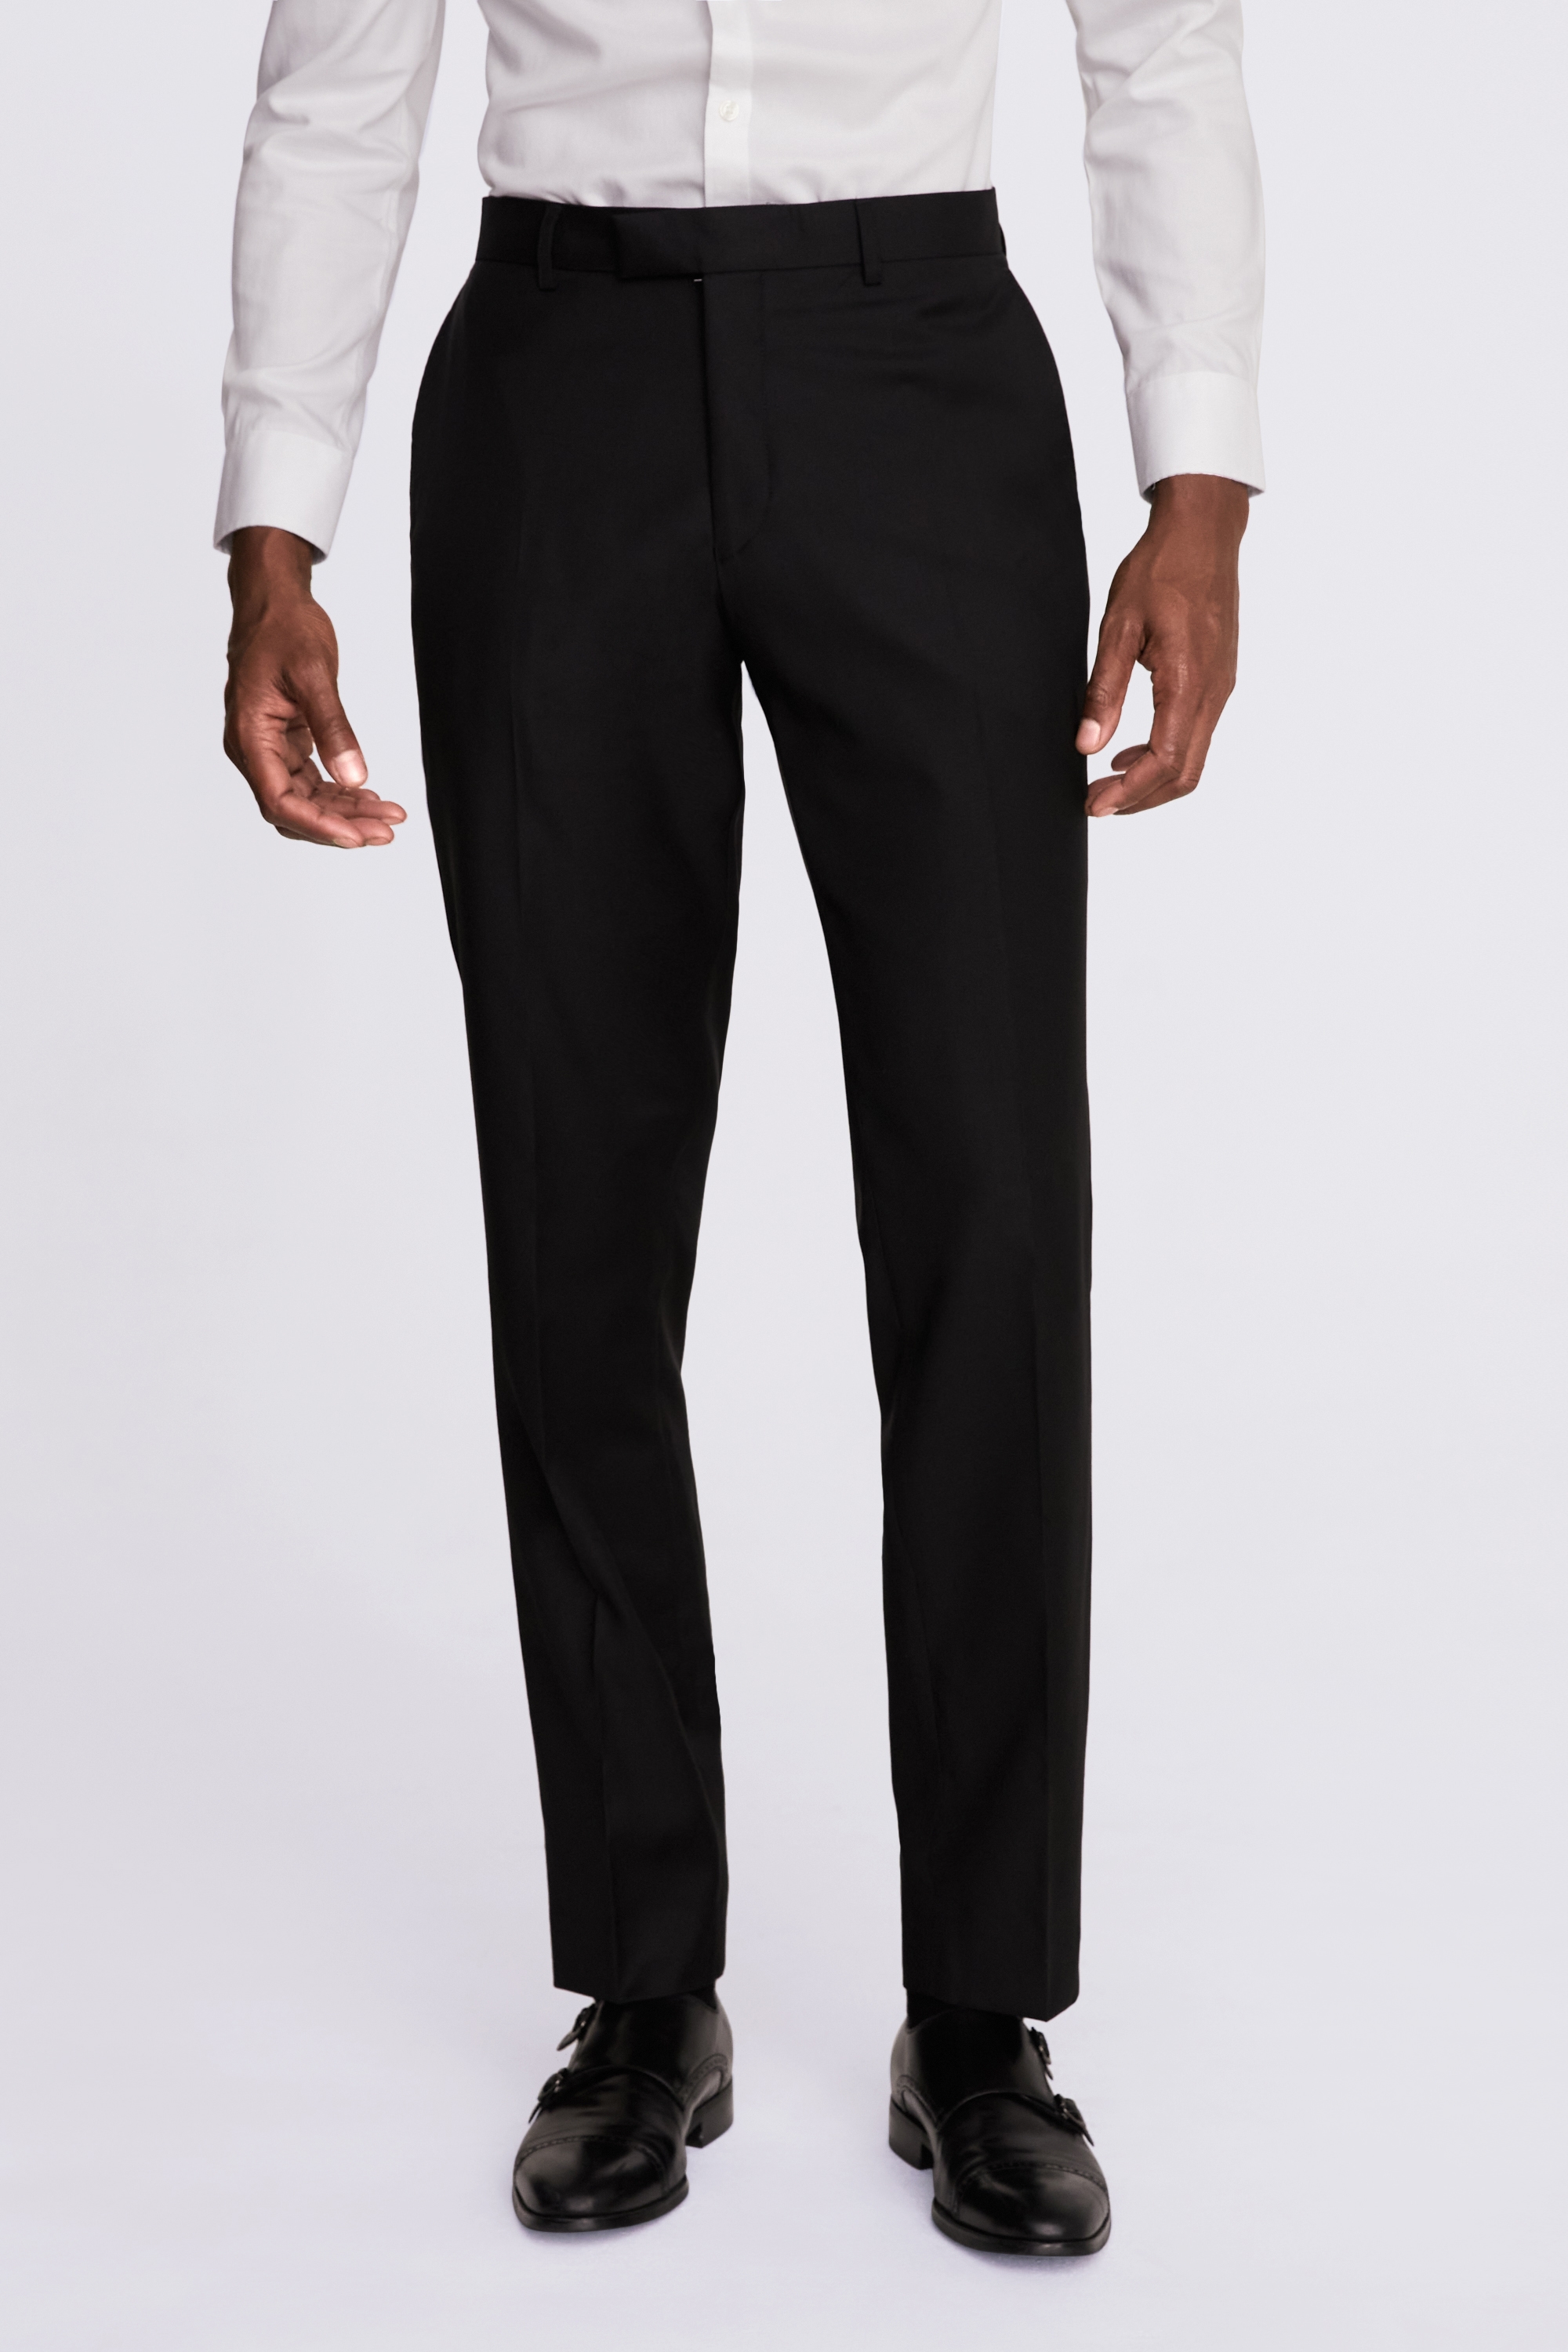 Italian Tailored Fit Black Twill Trousers | Buy Online at Moss